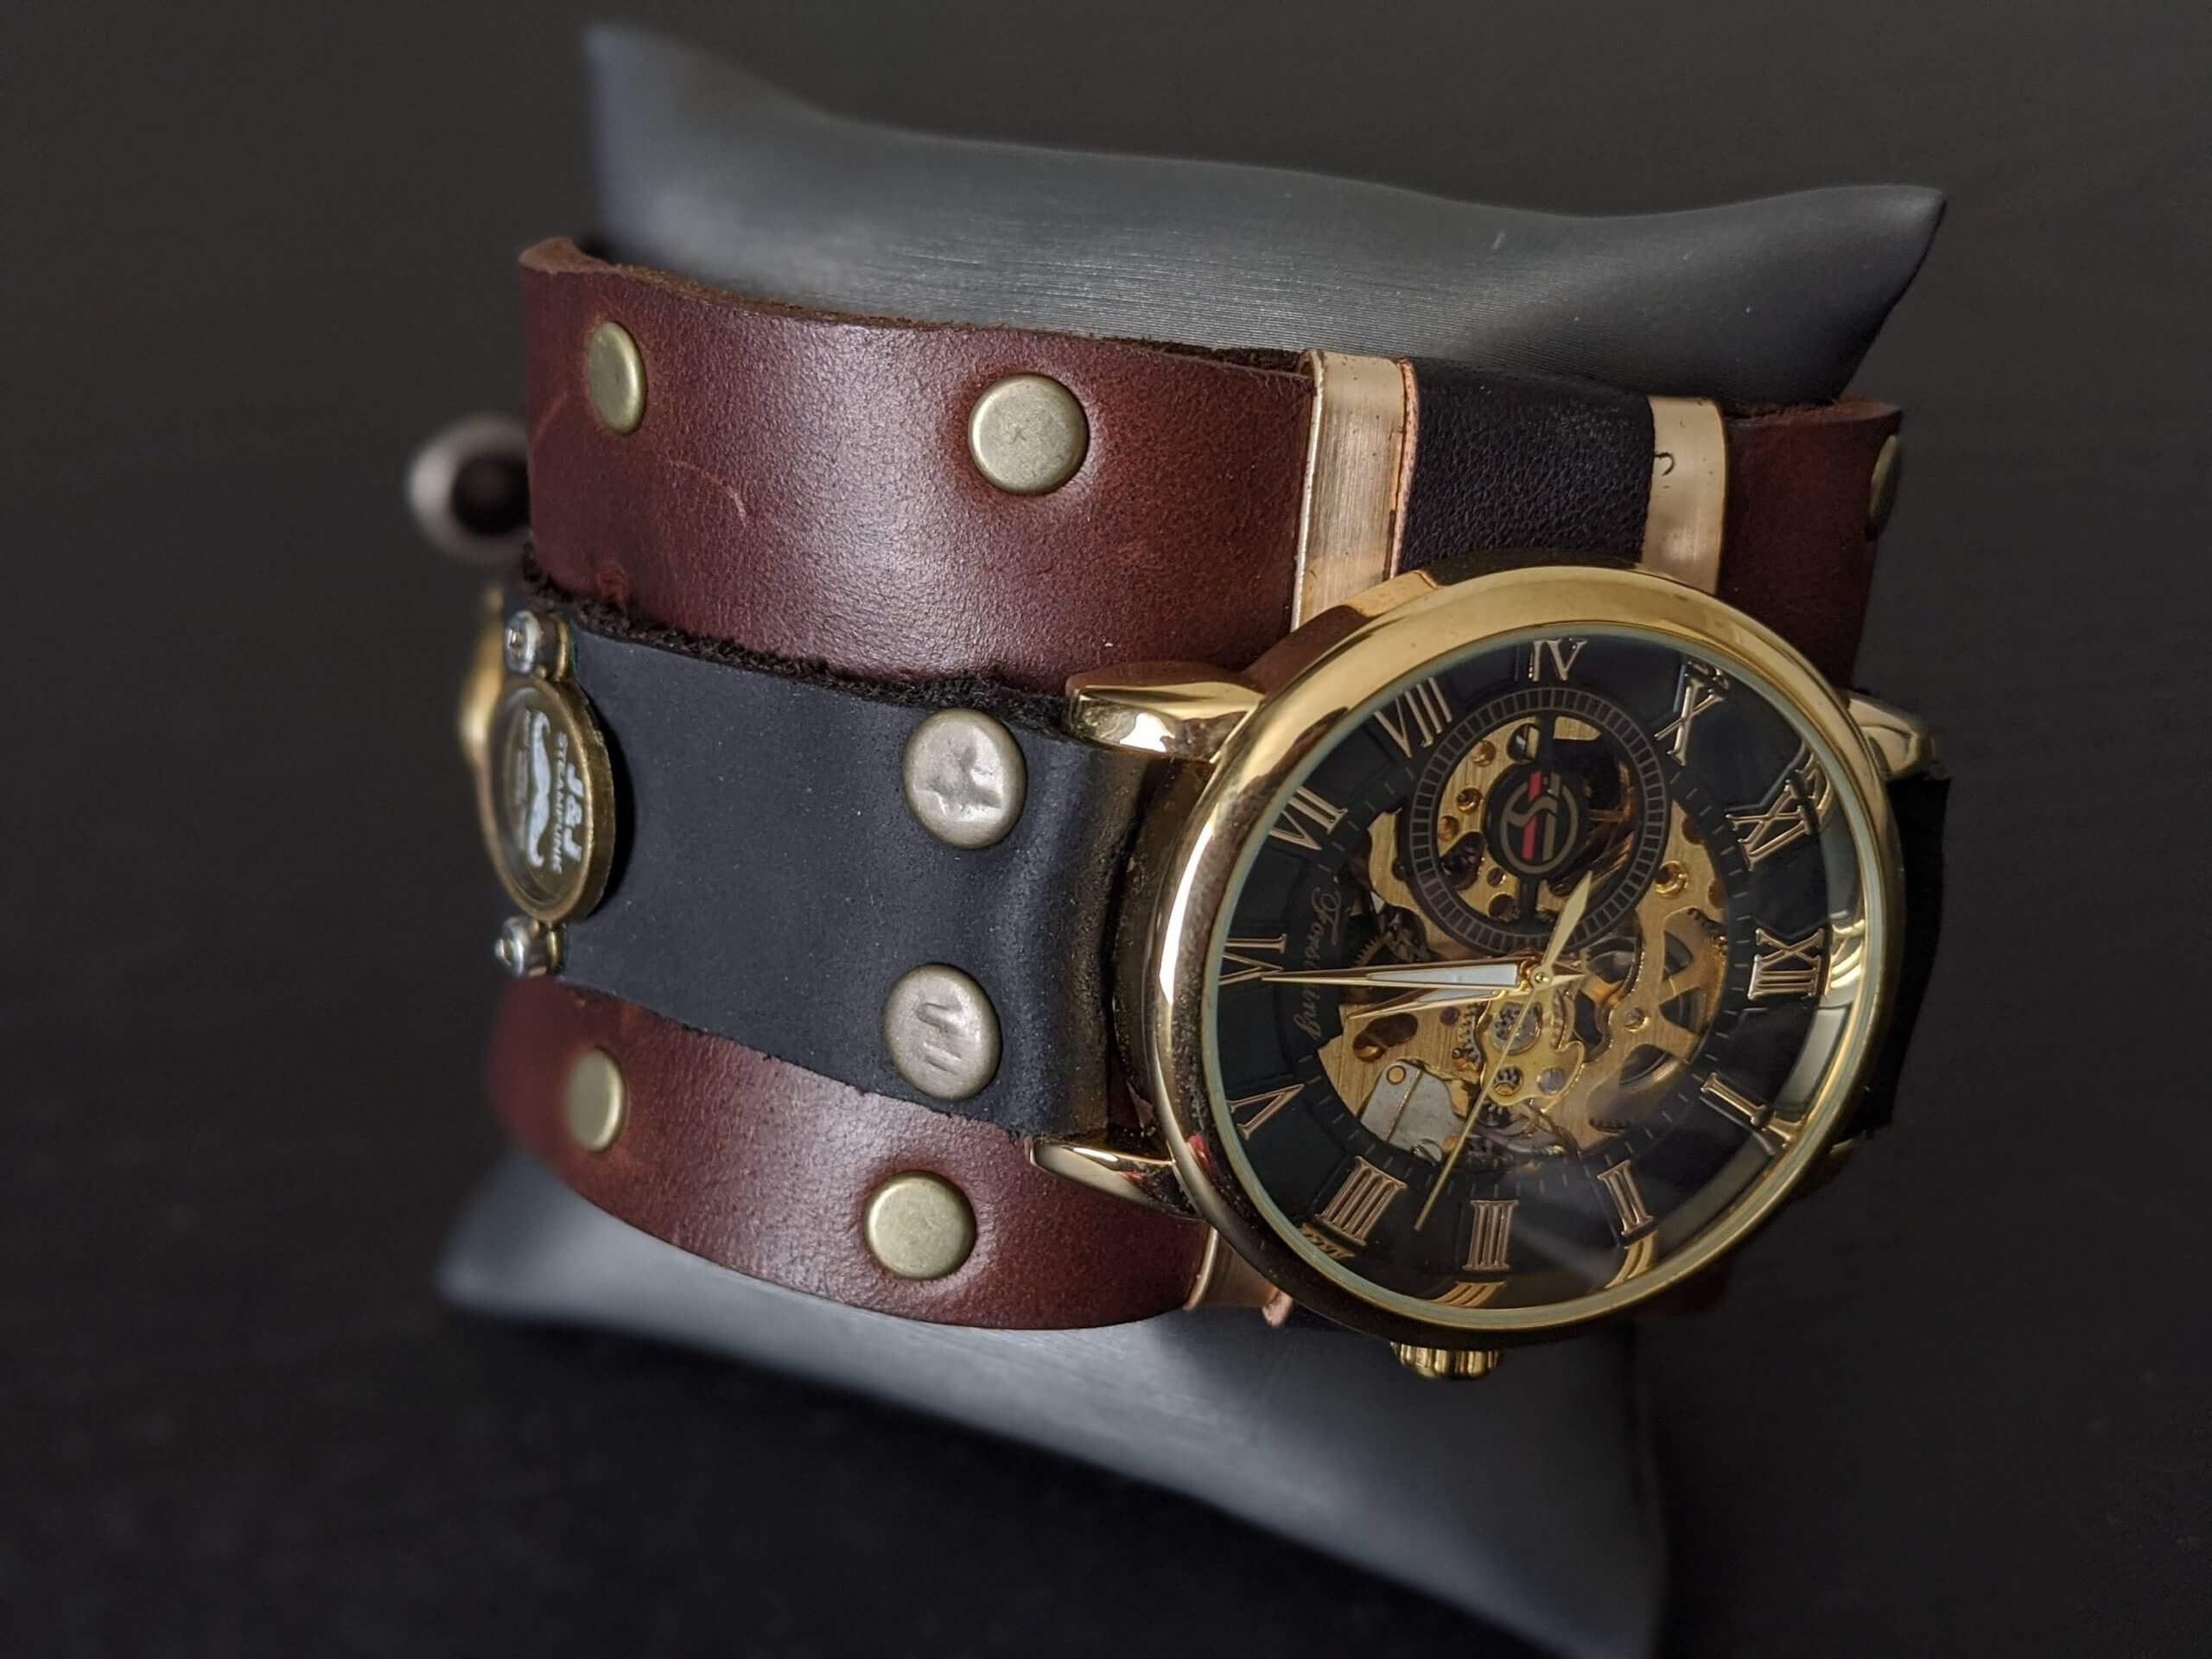 Leather bracelet with steampunk watch, Steampunk bracelet for cosplay,  Steampunk leather cuff, Leather strap watch, Gothic Movement Watch – J&J  Leather, Steampunk and Watches